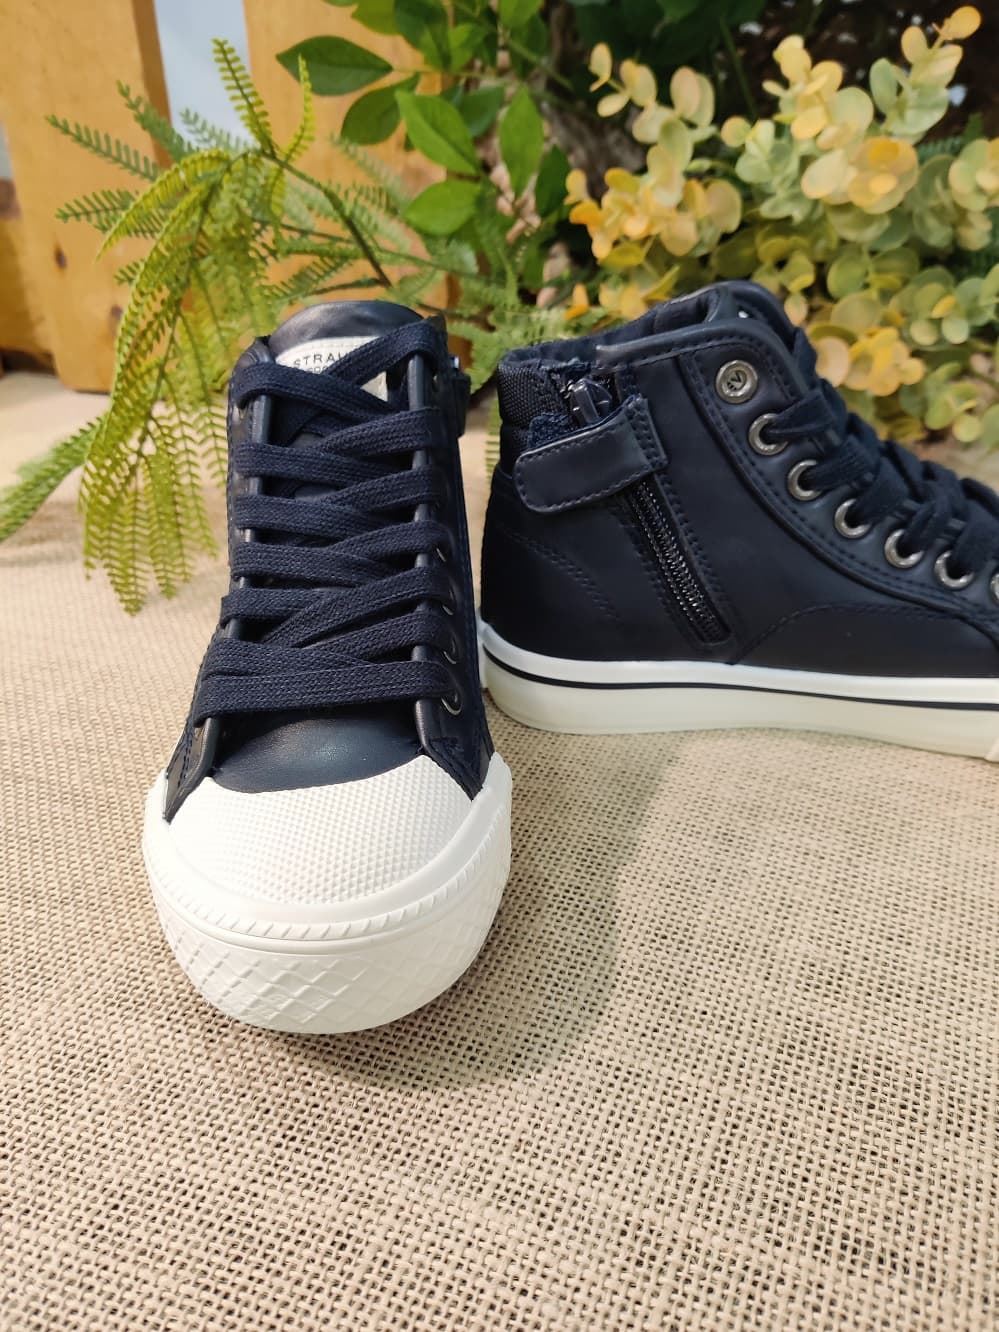 Levi's Navy Blue Central Park High Top Sneakers for kids - Image 3